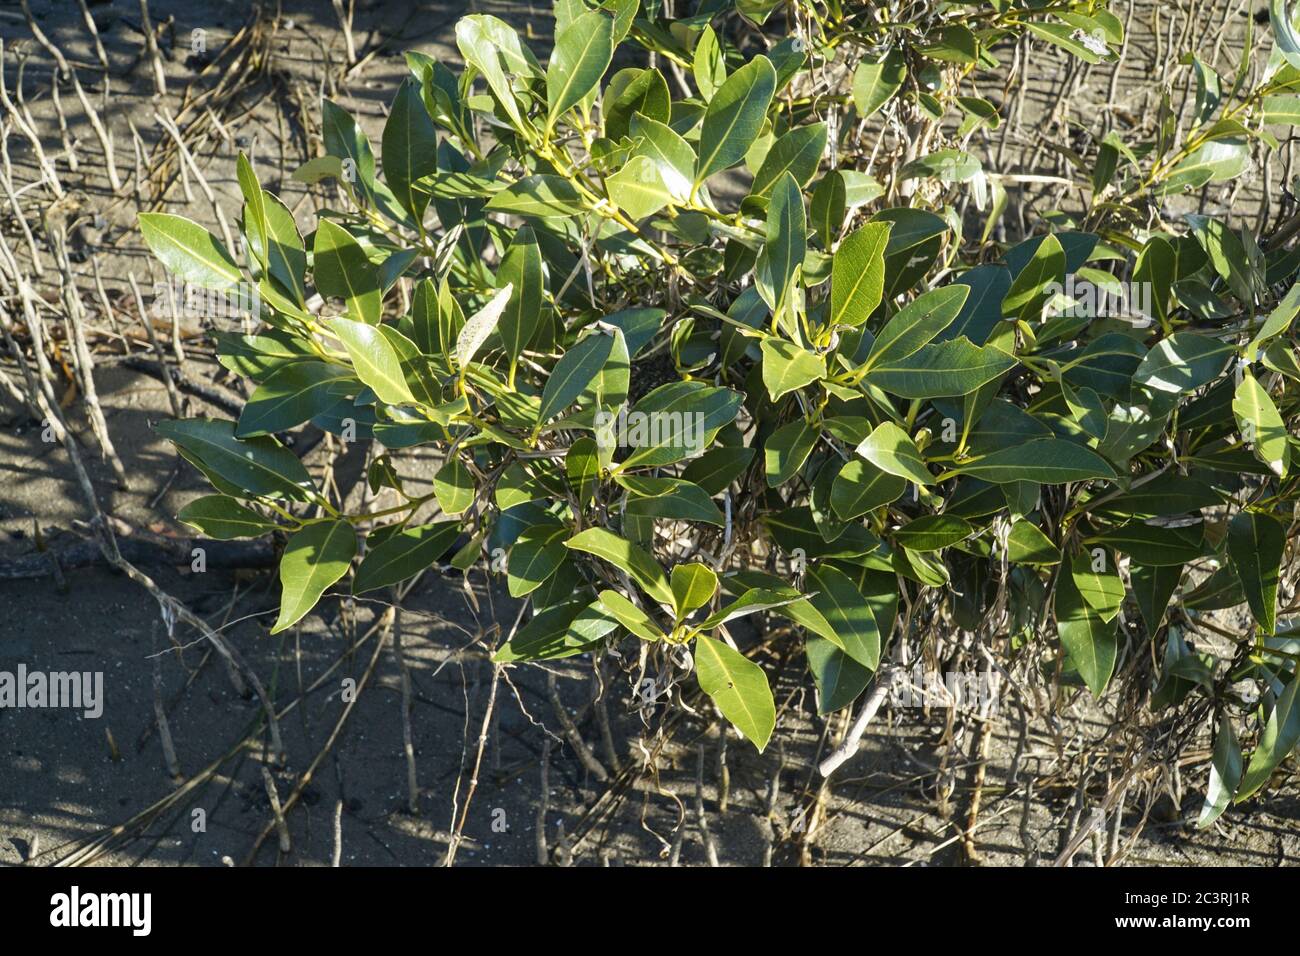 Young Mangrove trees, looking from above, showing the distinctive aerial roots growing up through the damp sand and the glossy green leaves. Stock Photo